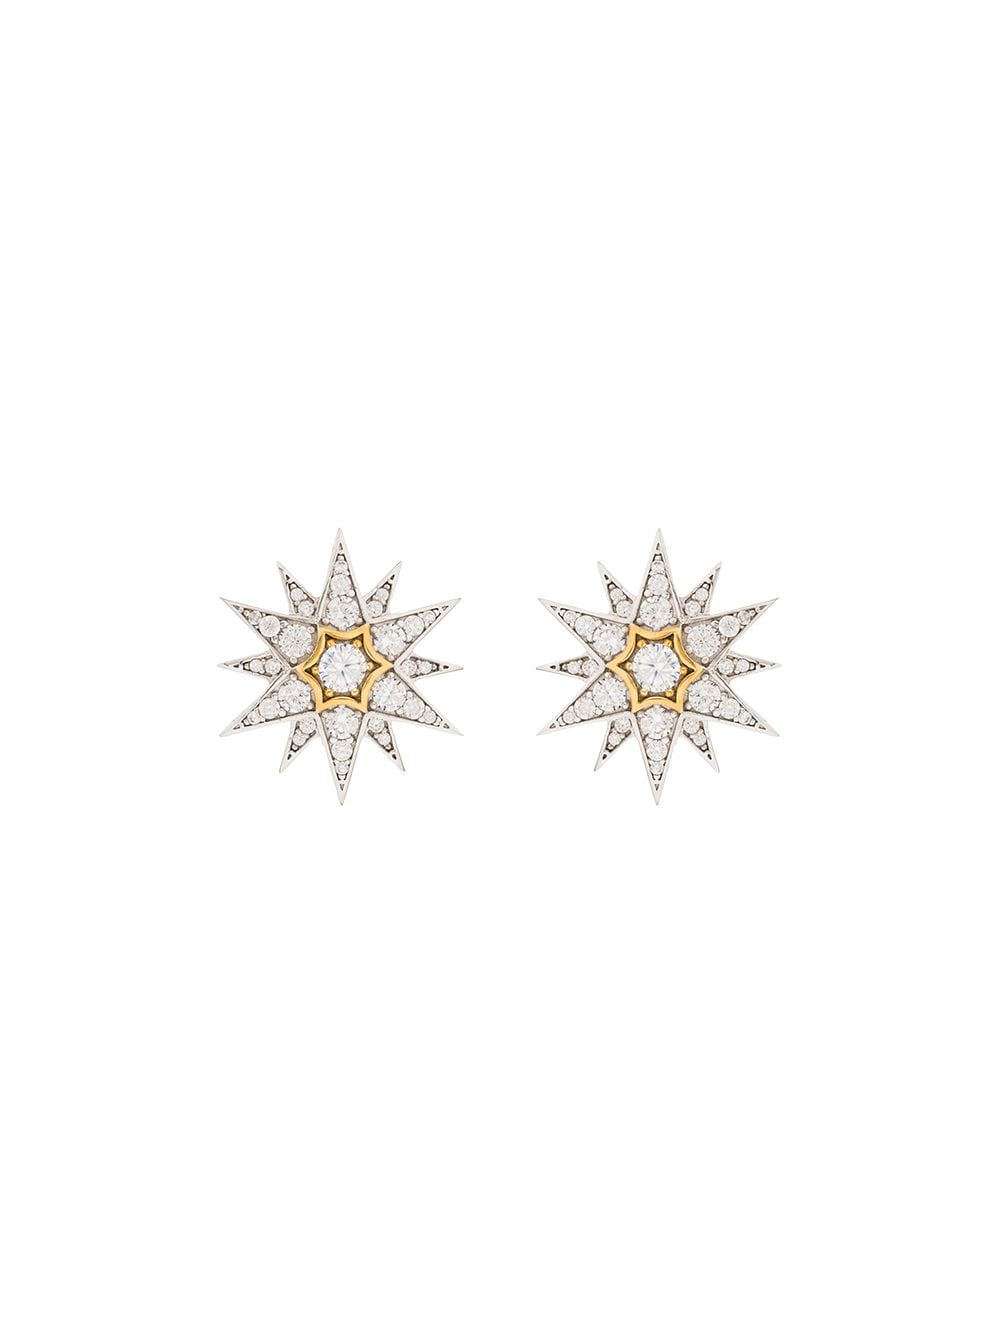 APPLES & FIGS 24K YELLOW GOLD-PLATED CELESTIAL CRYSTAL STAR EARRINGS